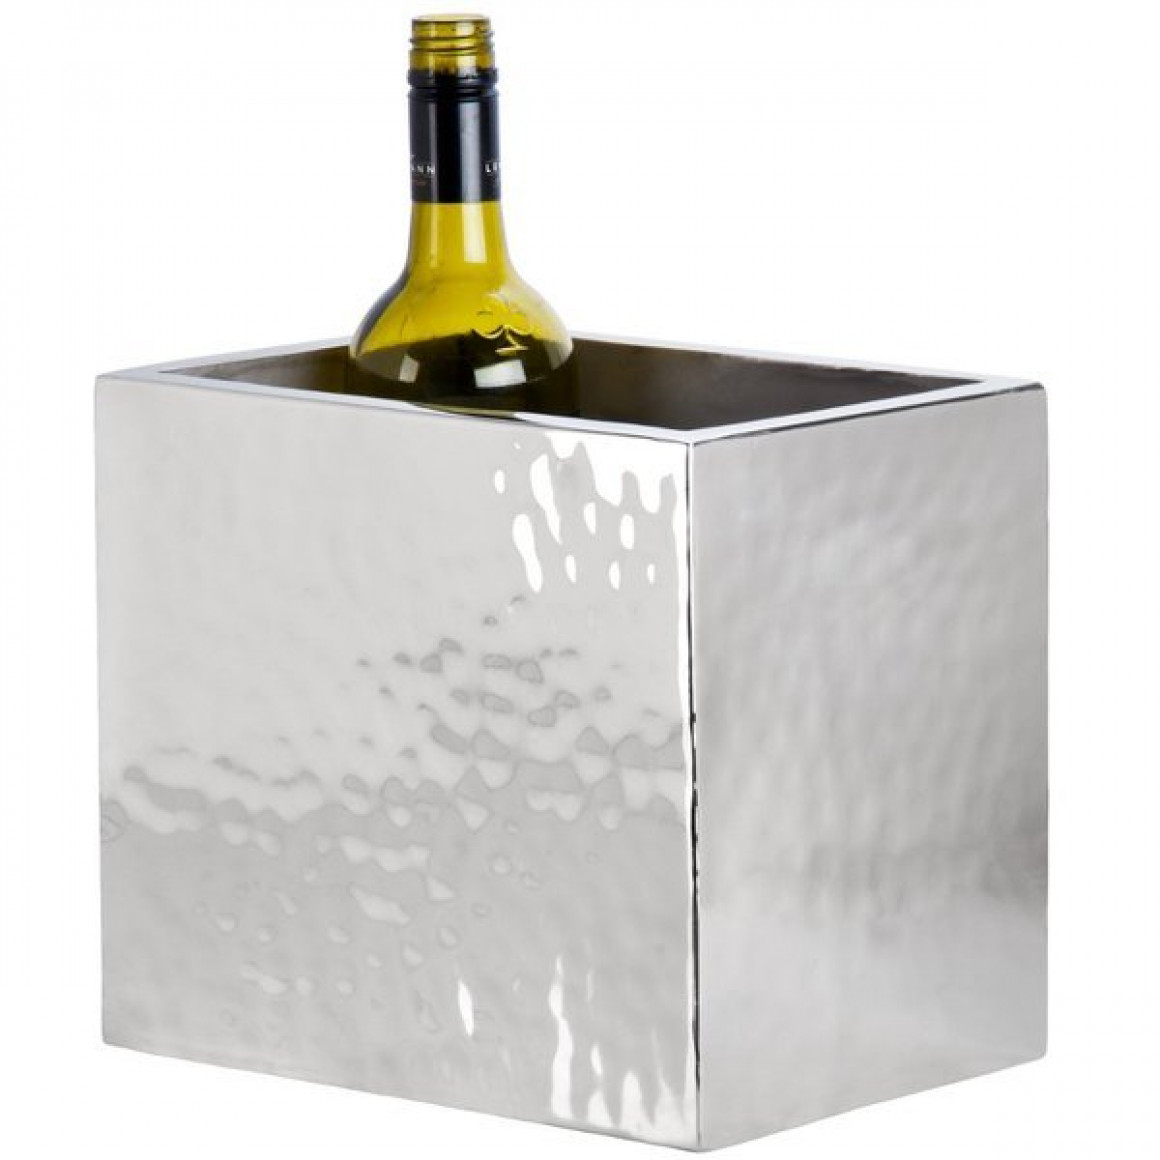 WINE COOLER, DOUBLE WALL, HAMMERED, TWO-BOTTLE